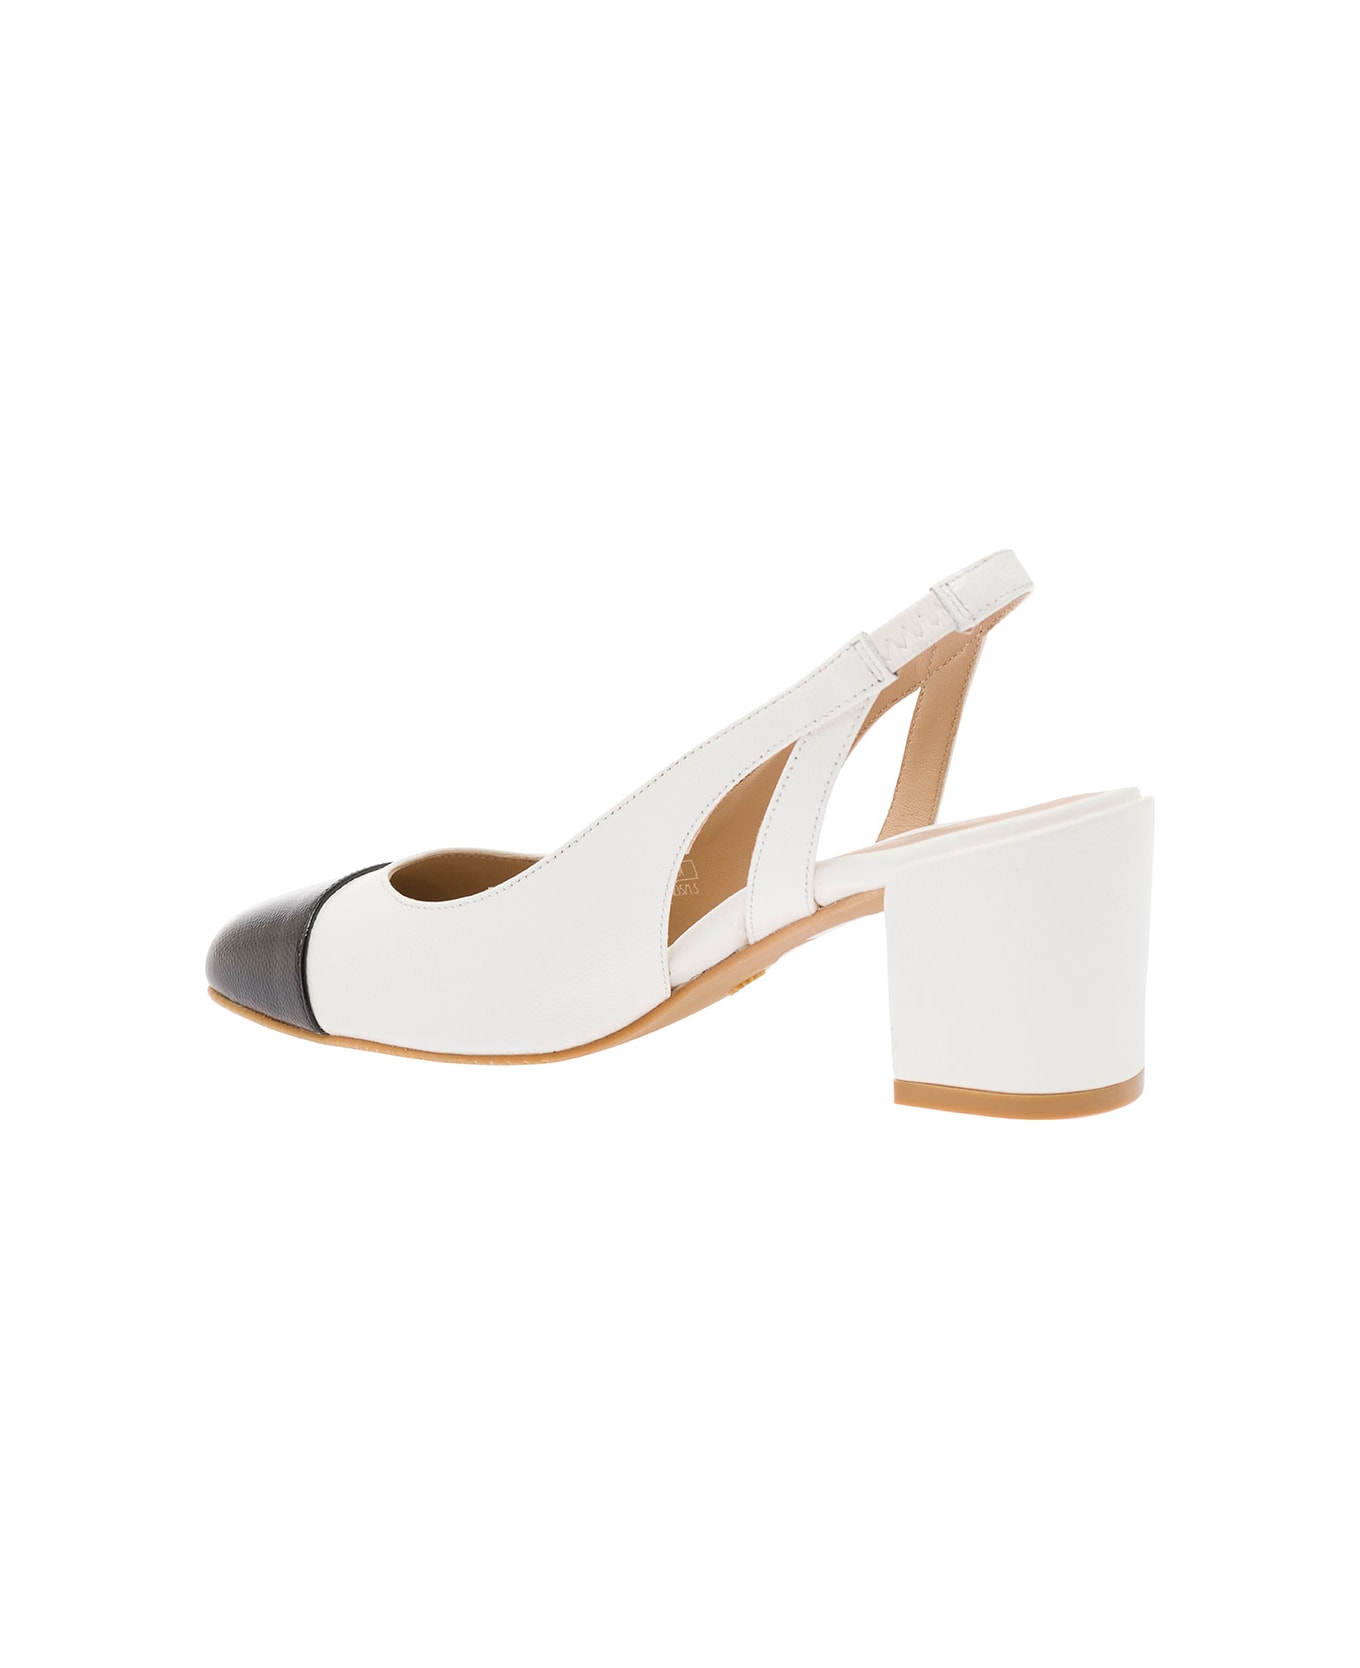 Stuart Weitzman White Slingback With Contrasting Toe In Smooth Leather Woman - White